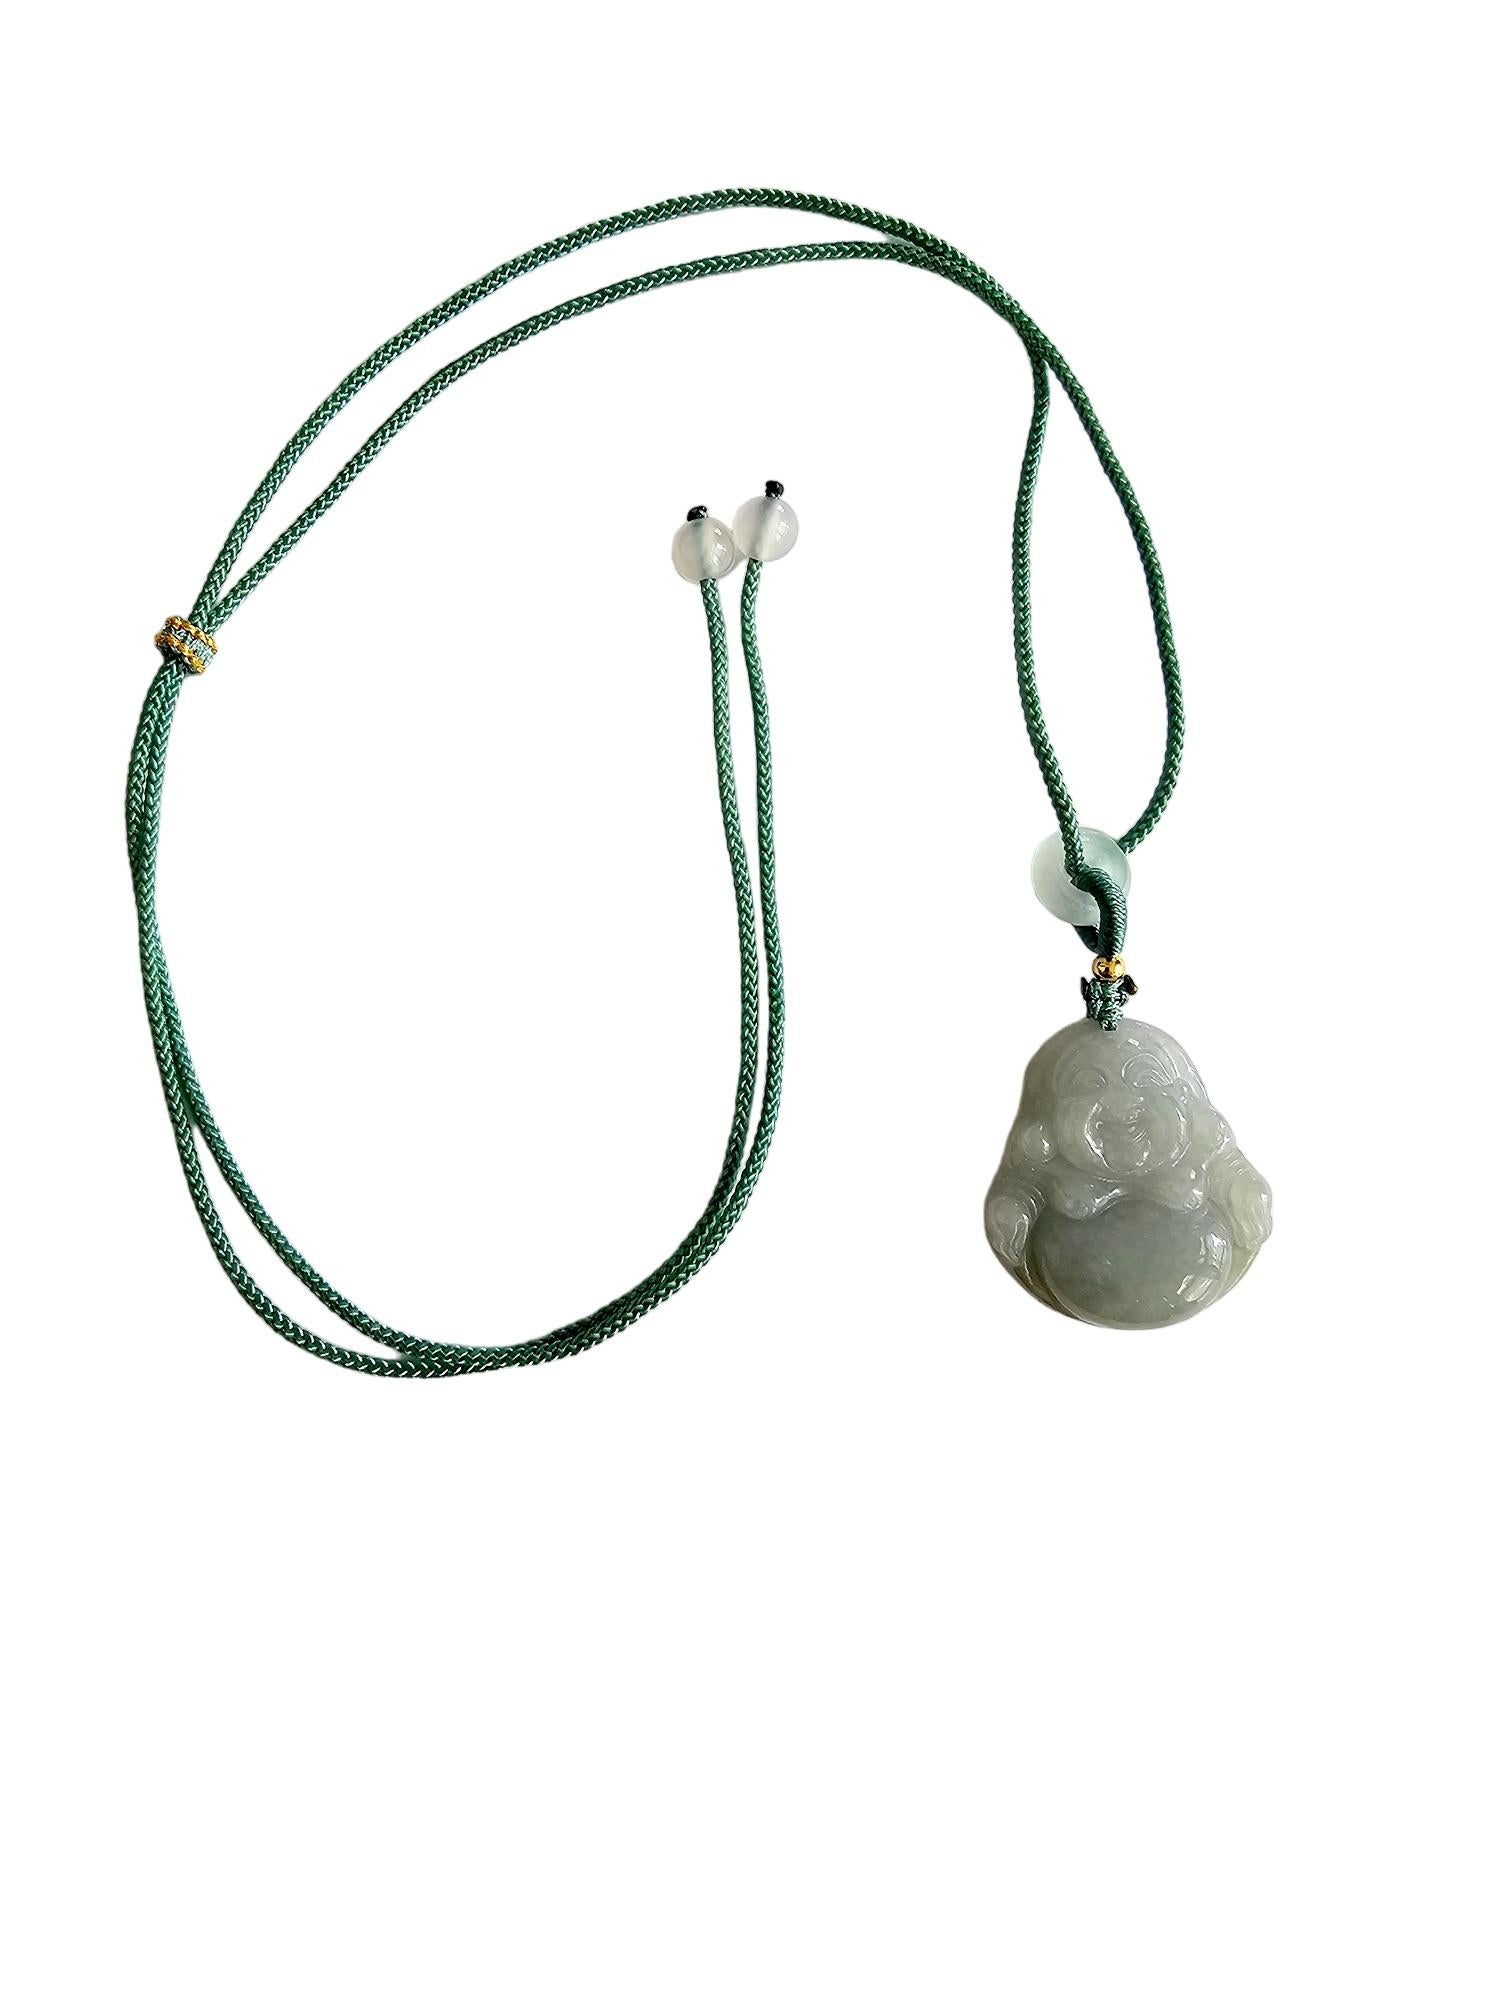 Sapporo Burmese A-Jadeite Big Laughing Buddha Pendant Necklace with FYORO String For Sale 5